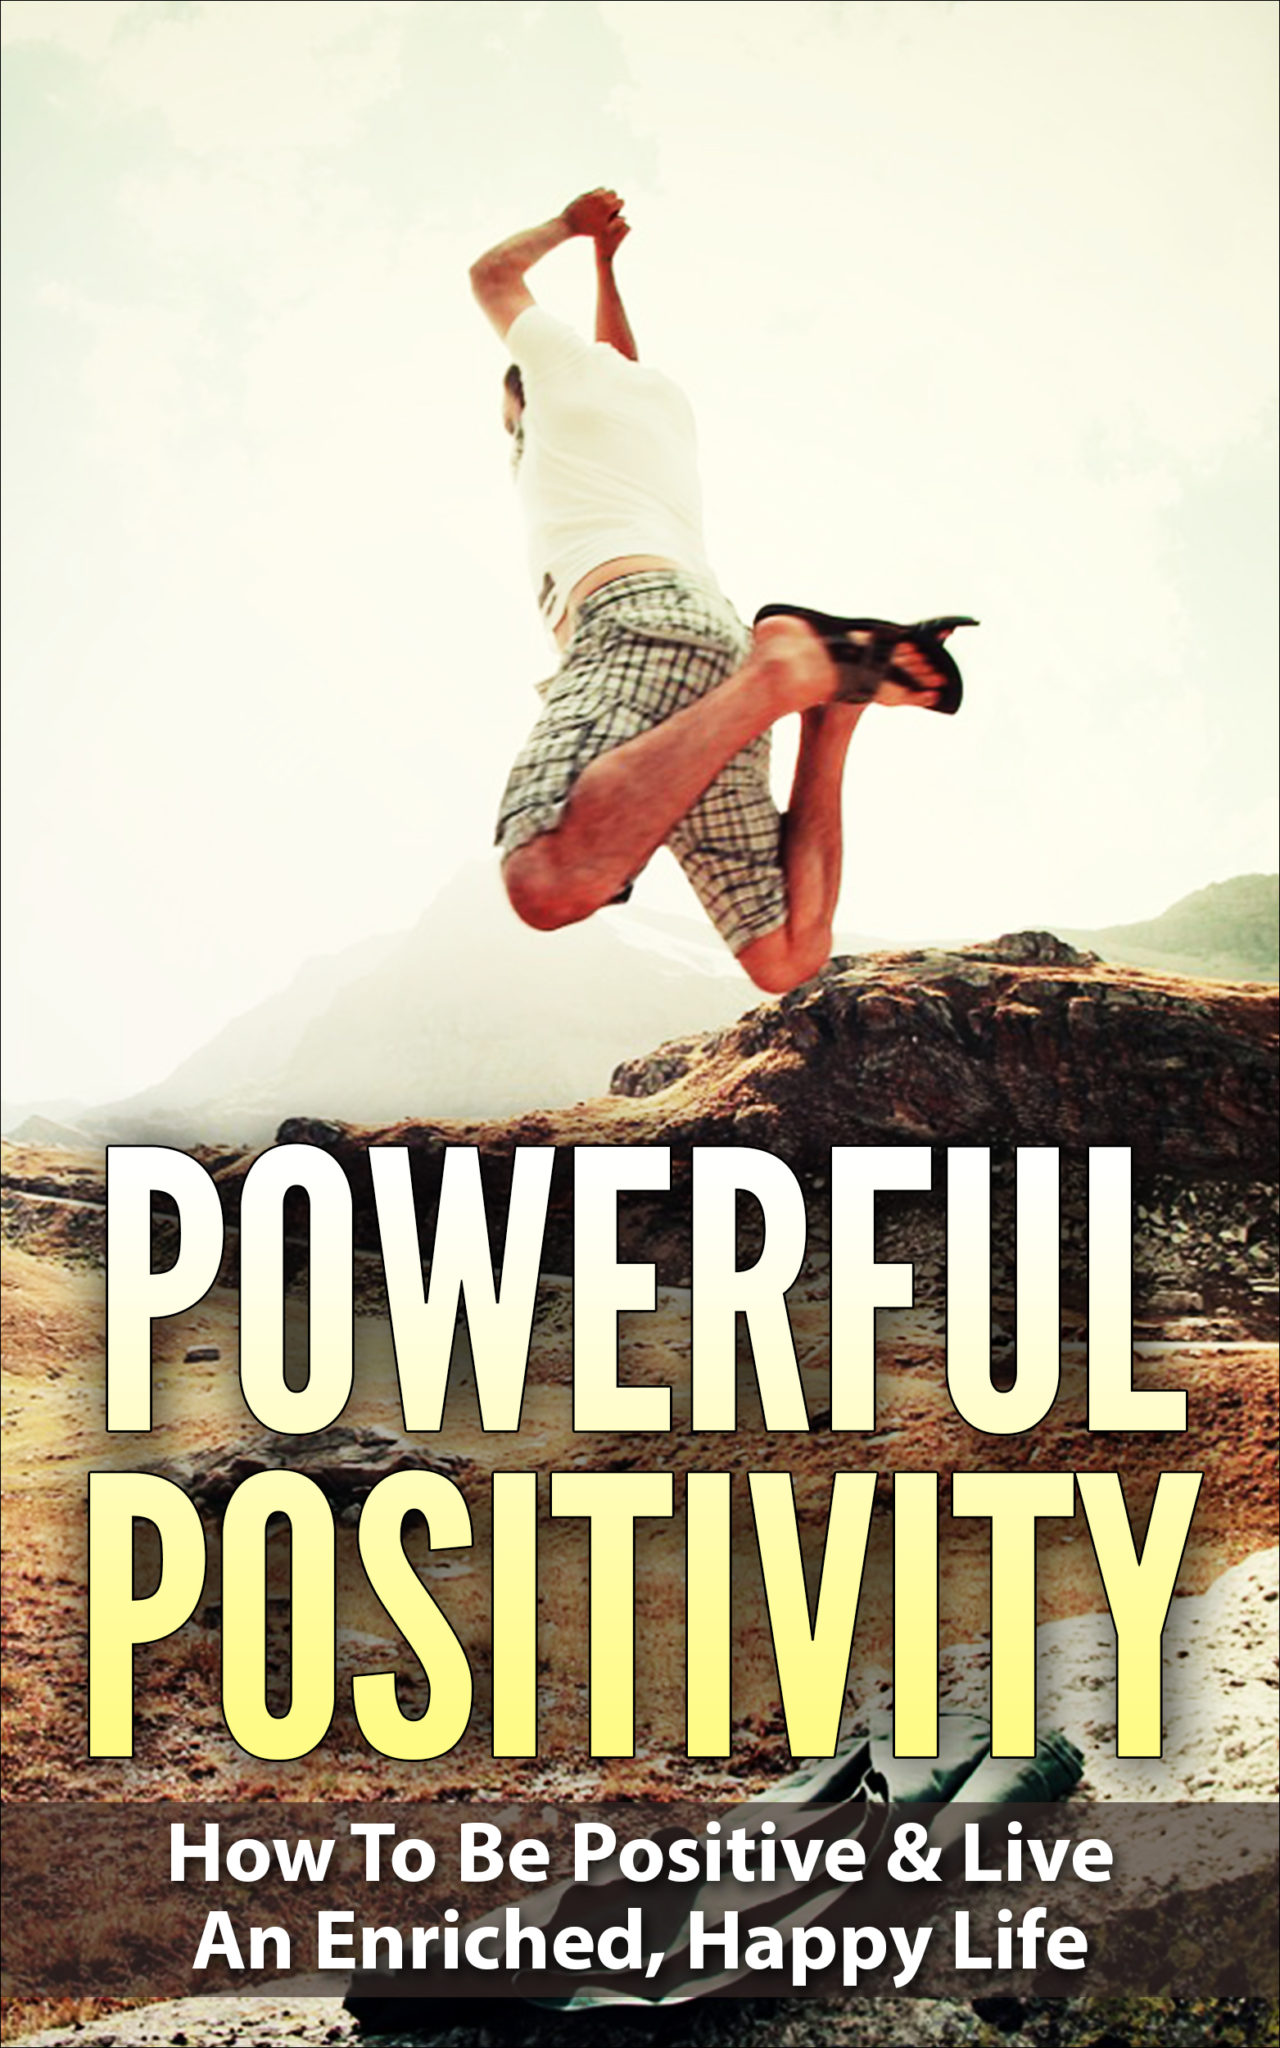 FREE: Positive Thinking – Powerful Positivity: How To Be Positive & Live An Enriched, Happy Life by Barry Bede